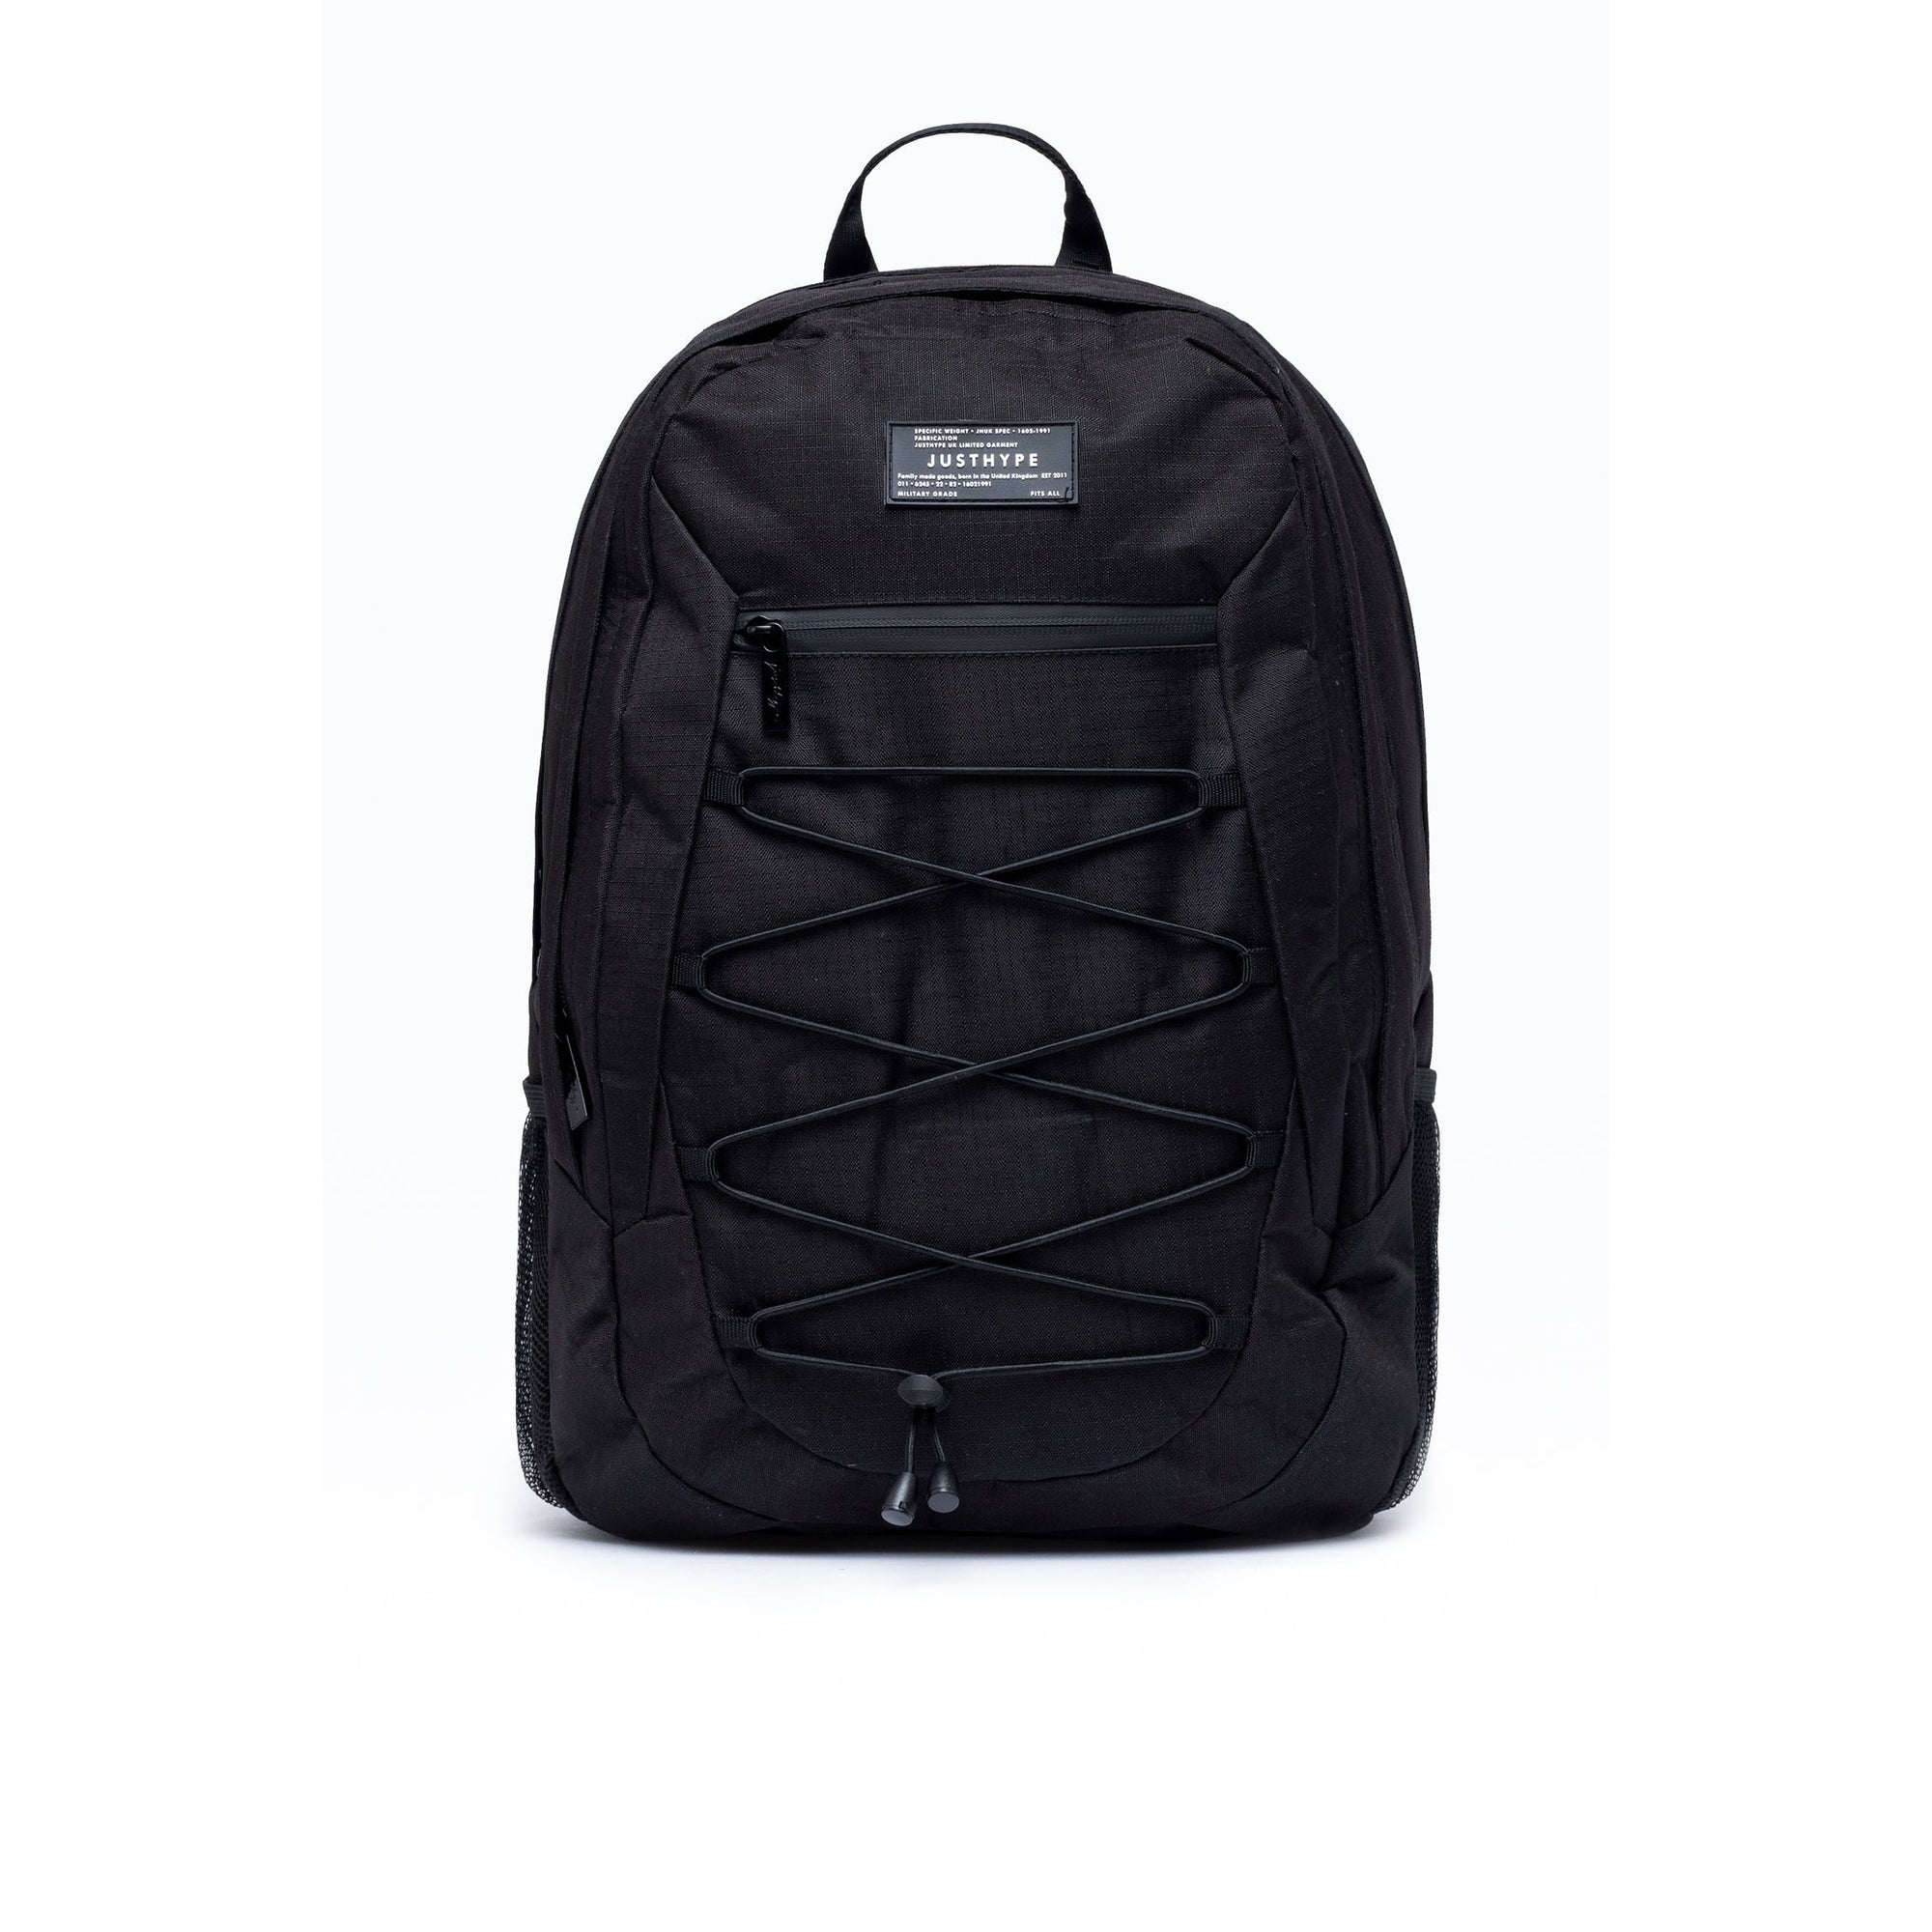 Hype Black Maxi Backpack Bts21306 Accessories ONE SIZE / Black